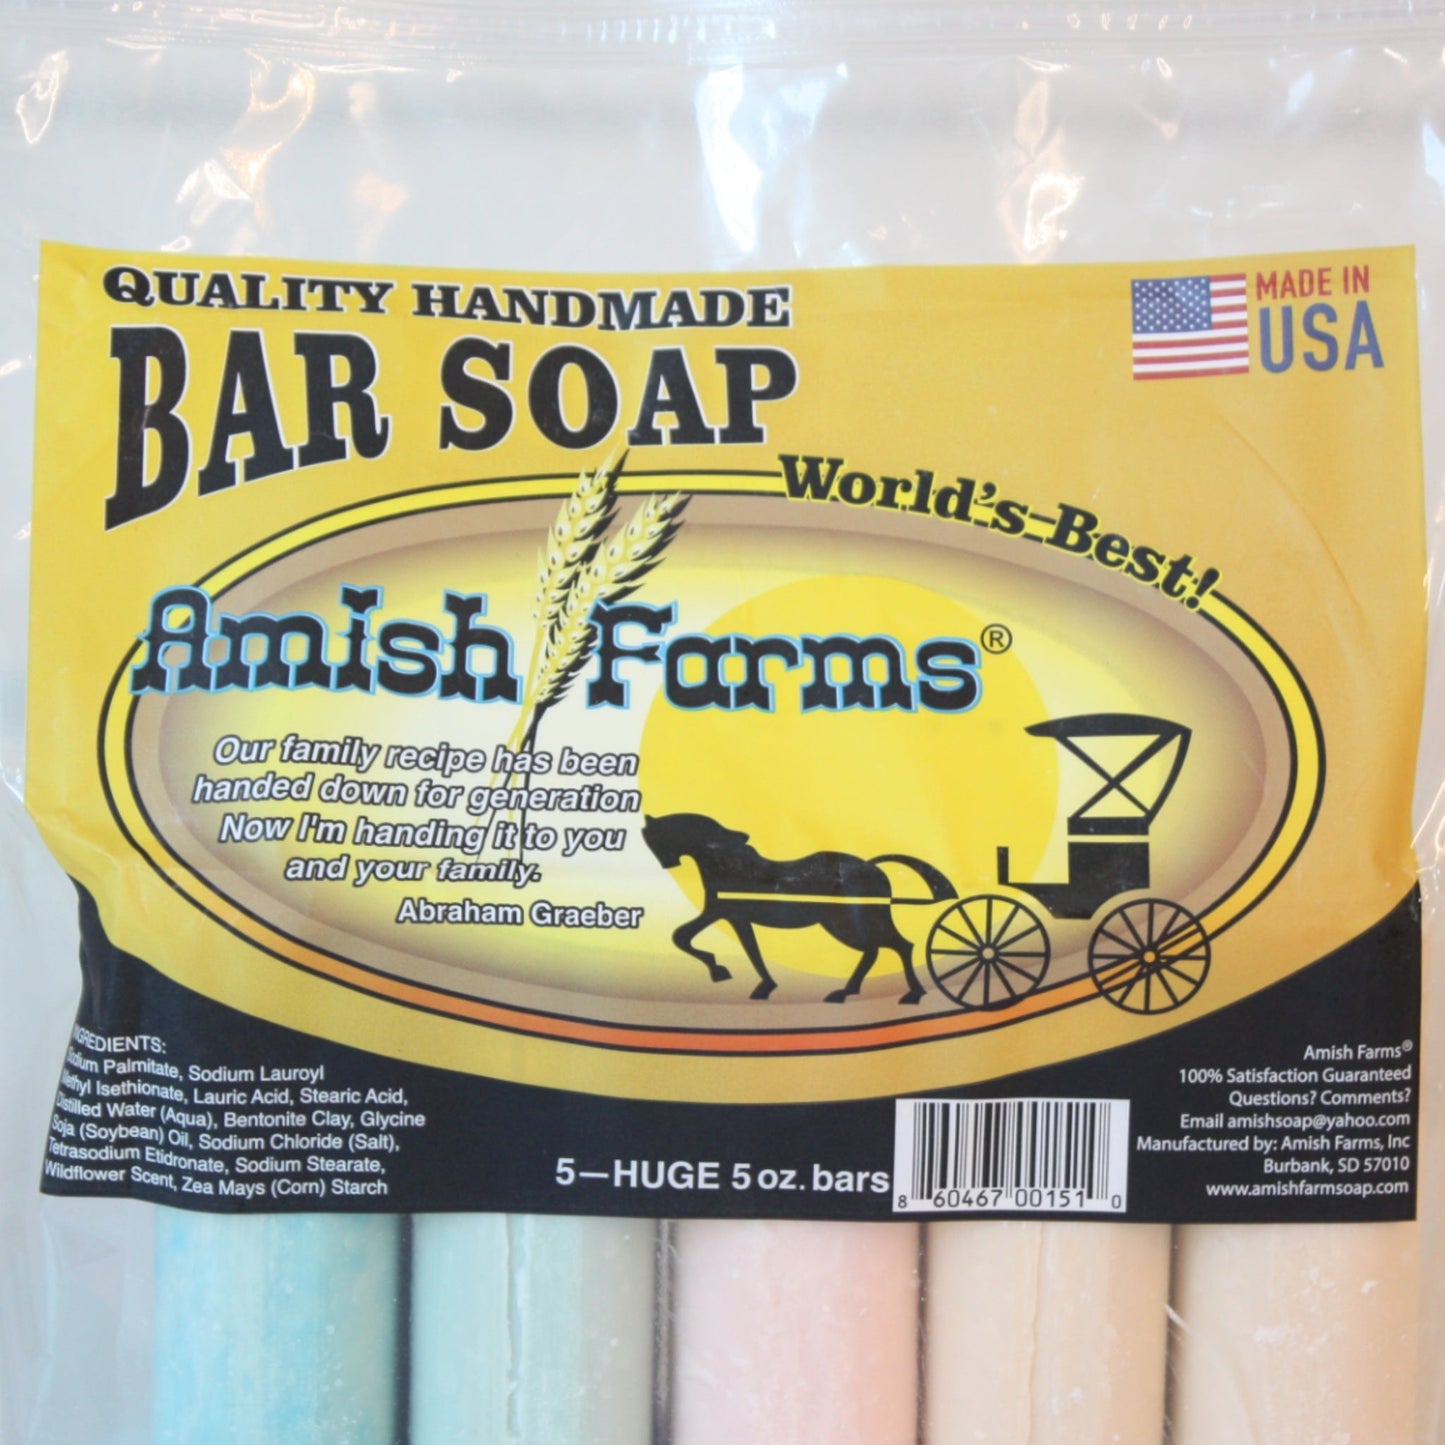 Amish Farms Natural Bar Soap (5 Bars) Wildflower Scent, Made in USA